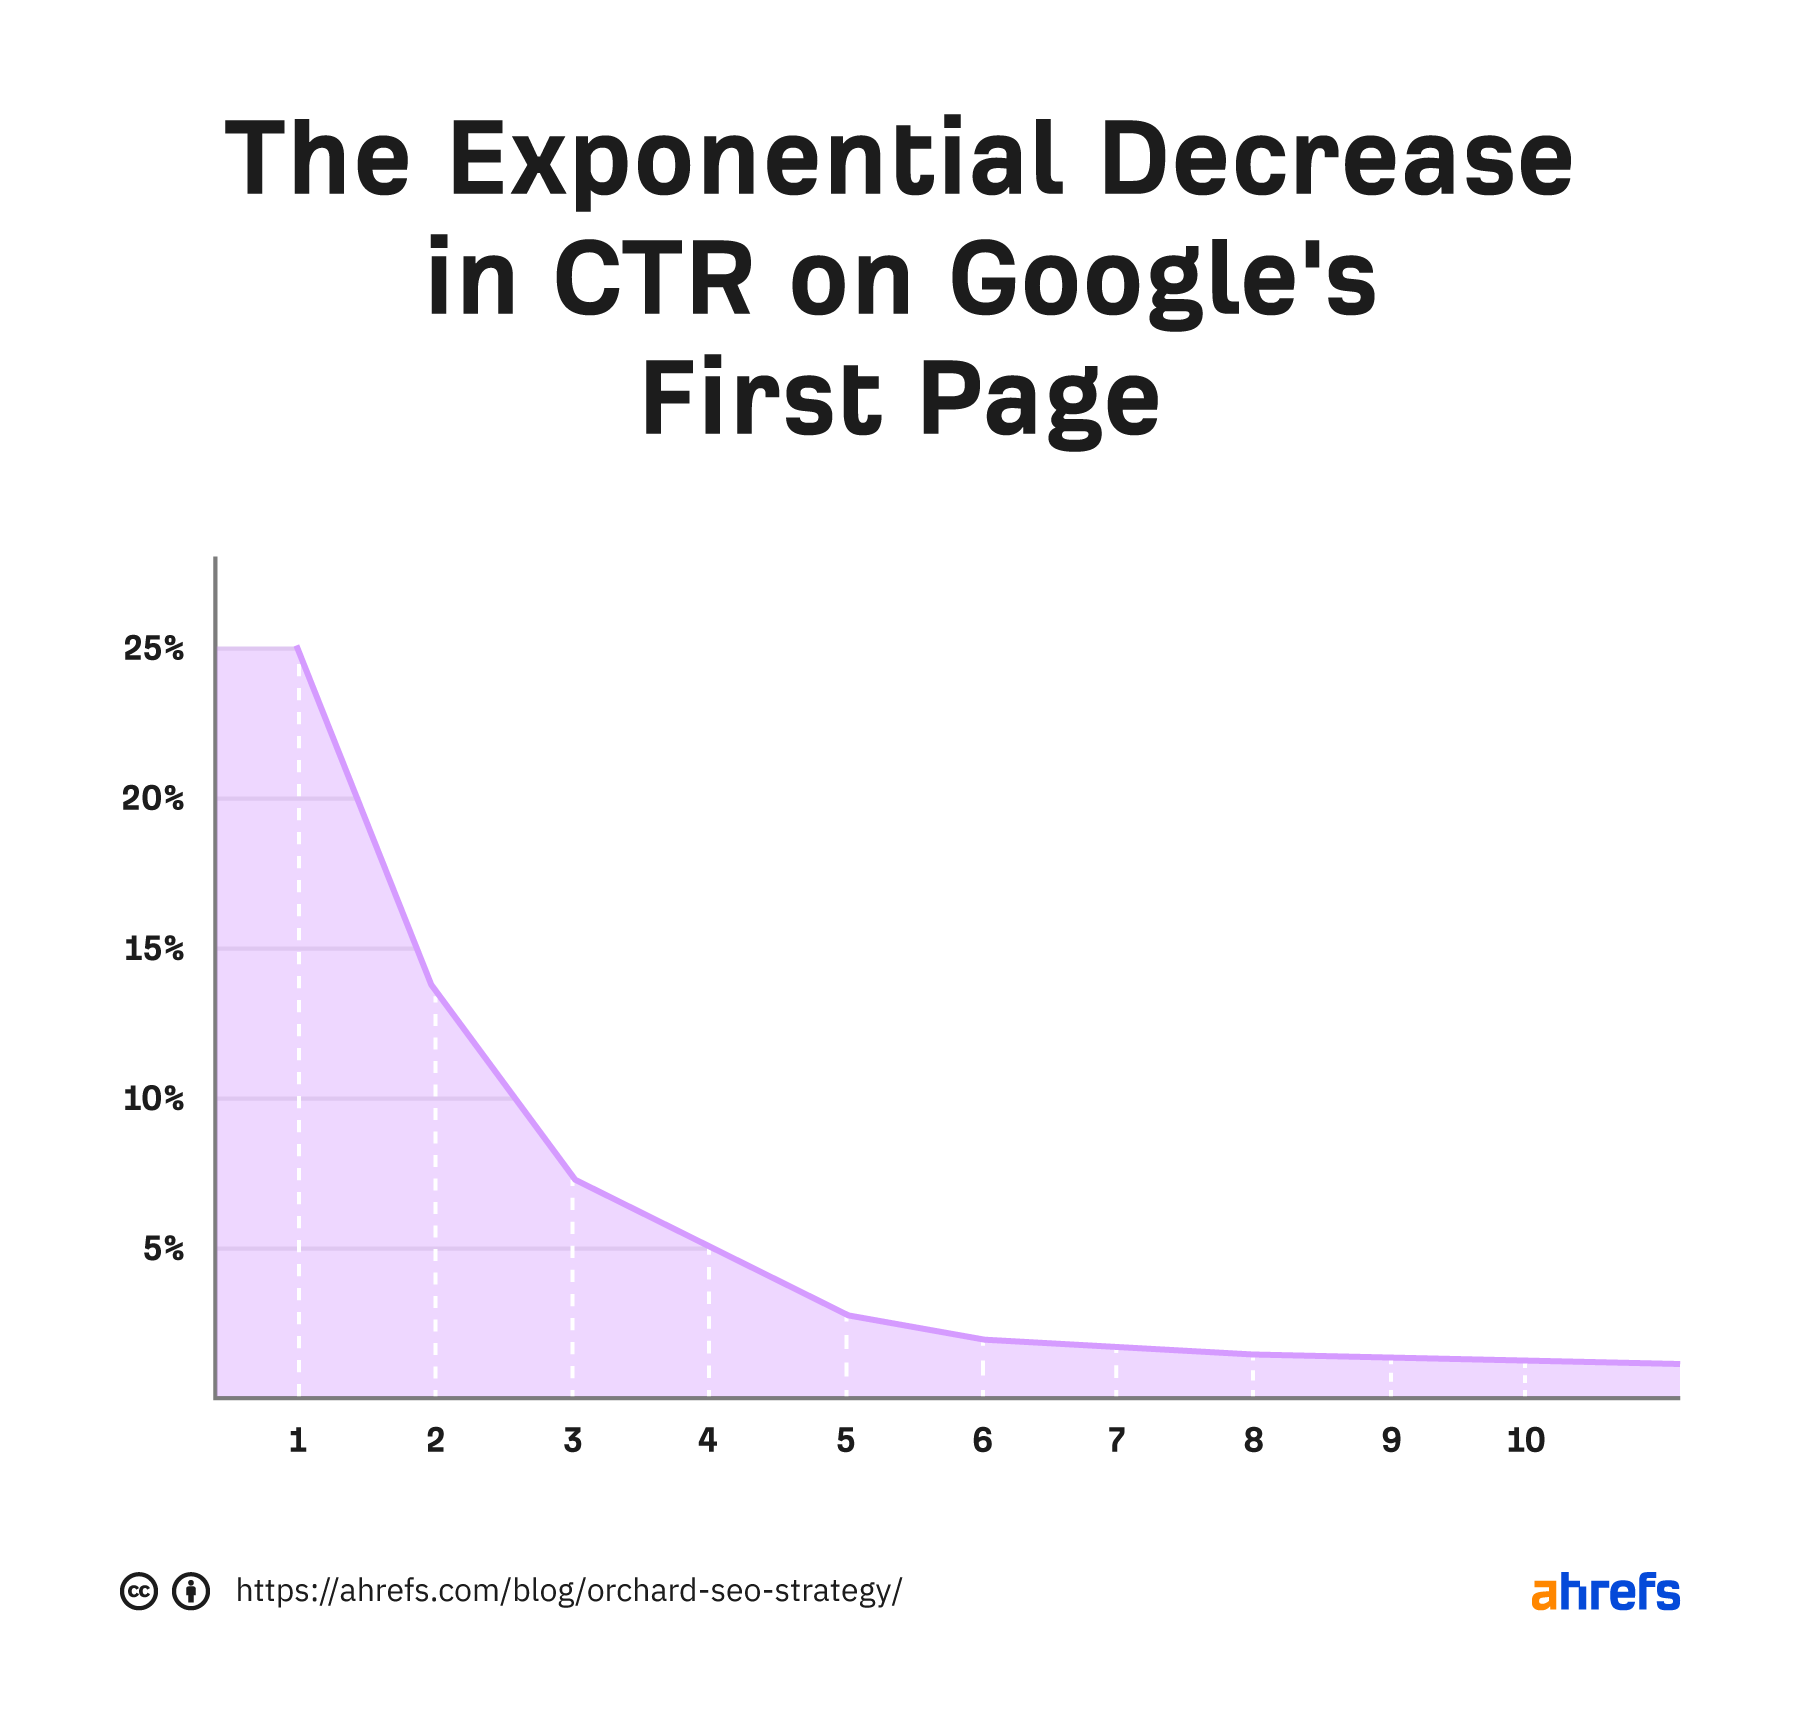 The exponential decrease in CTR on Google's first page